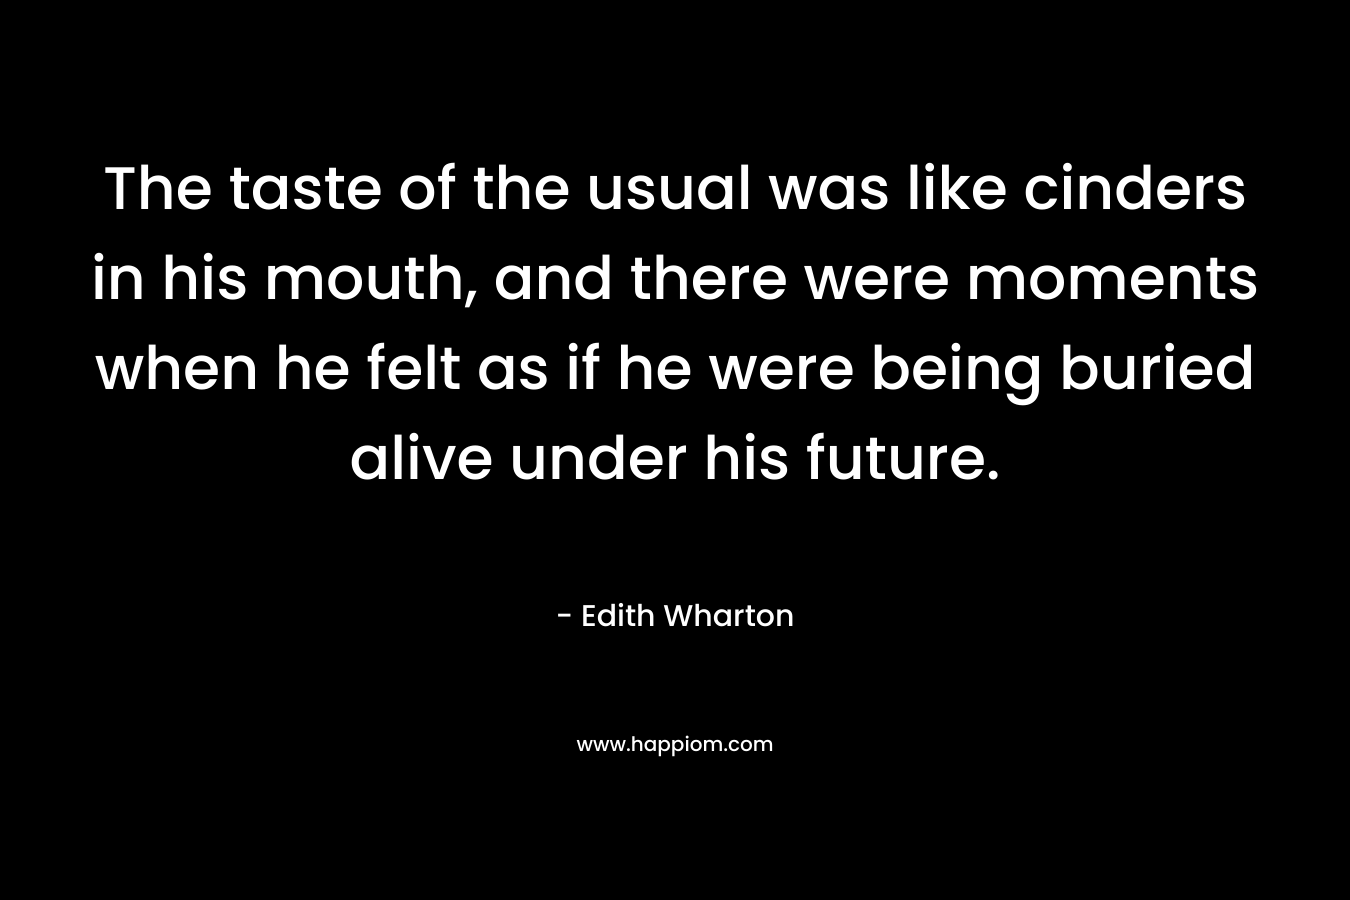 The taste of the usual was like cinders in his mouth, and there were moments when he felt as if he were being buried alive under his future. – Edith Wharton